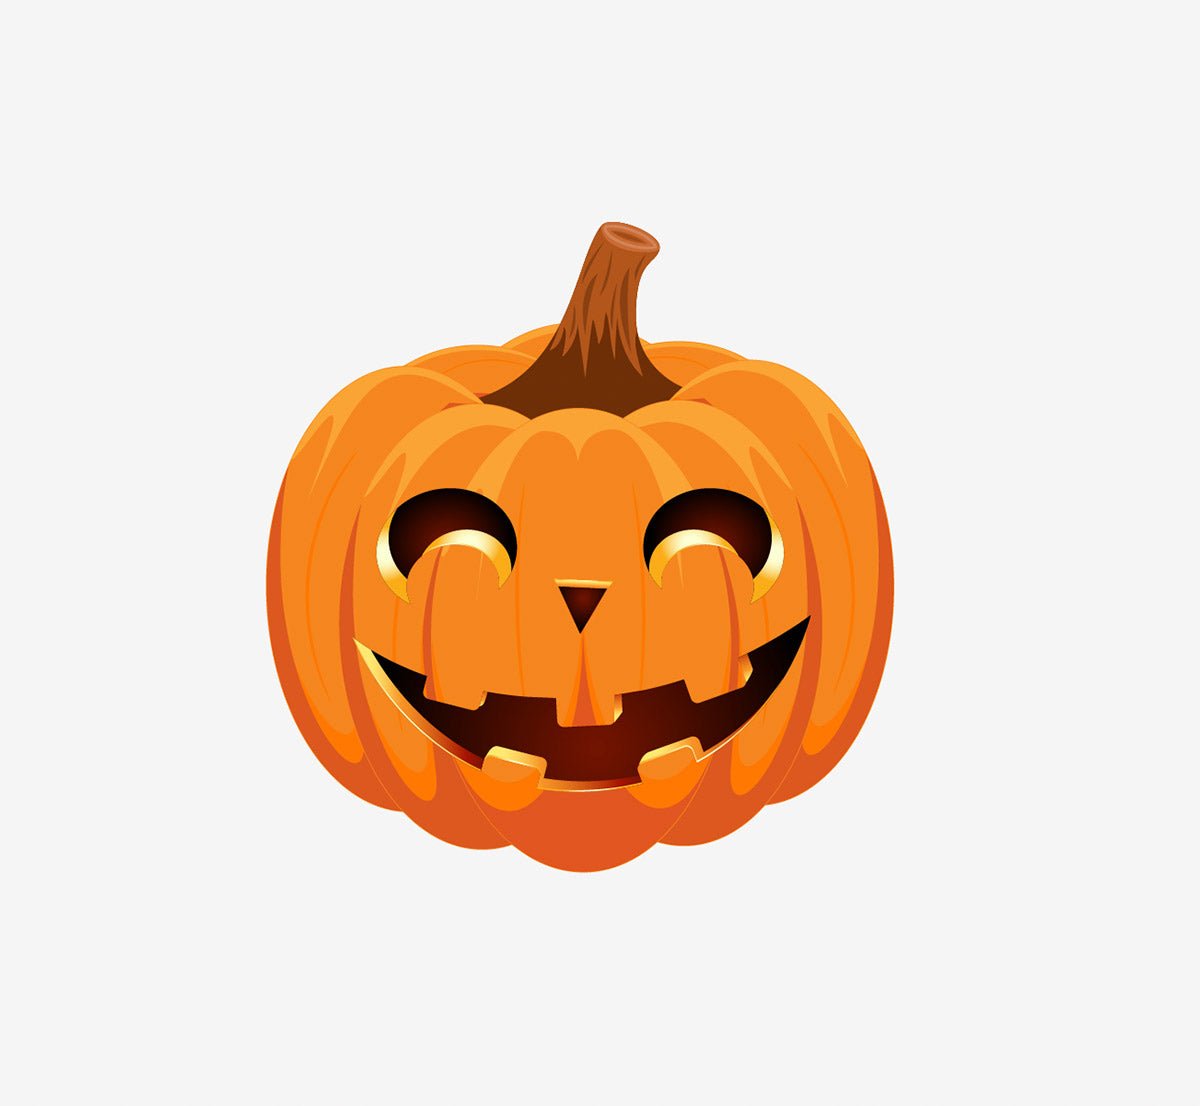 Illustration of a Jack O' Lantern Pumpkin Decal with a smiling face on a plain white background, perfect for Halloween decorations. (Cover-Alls)